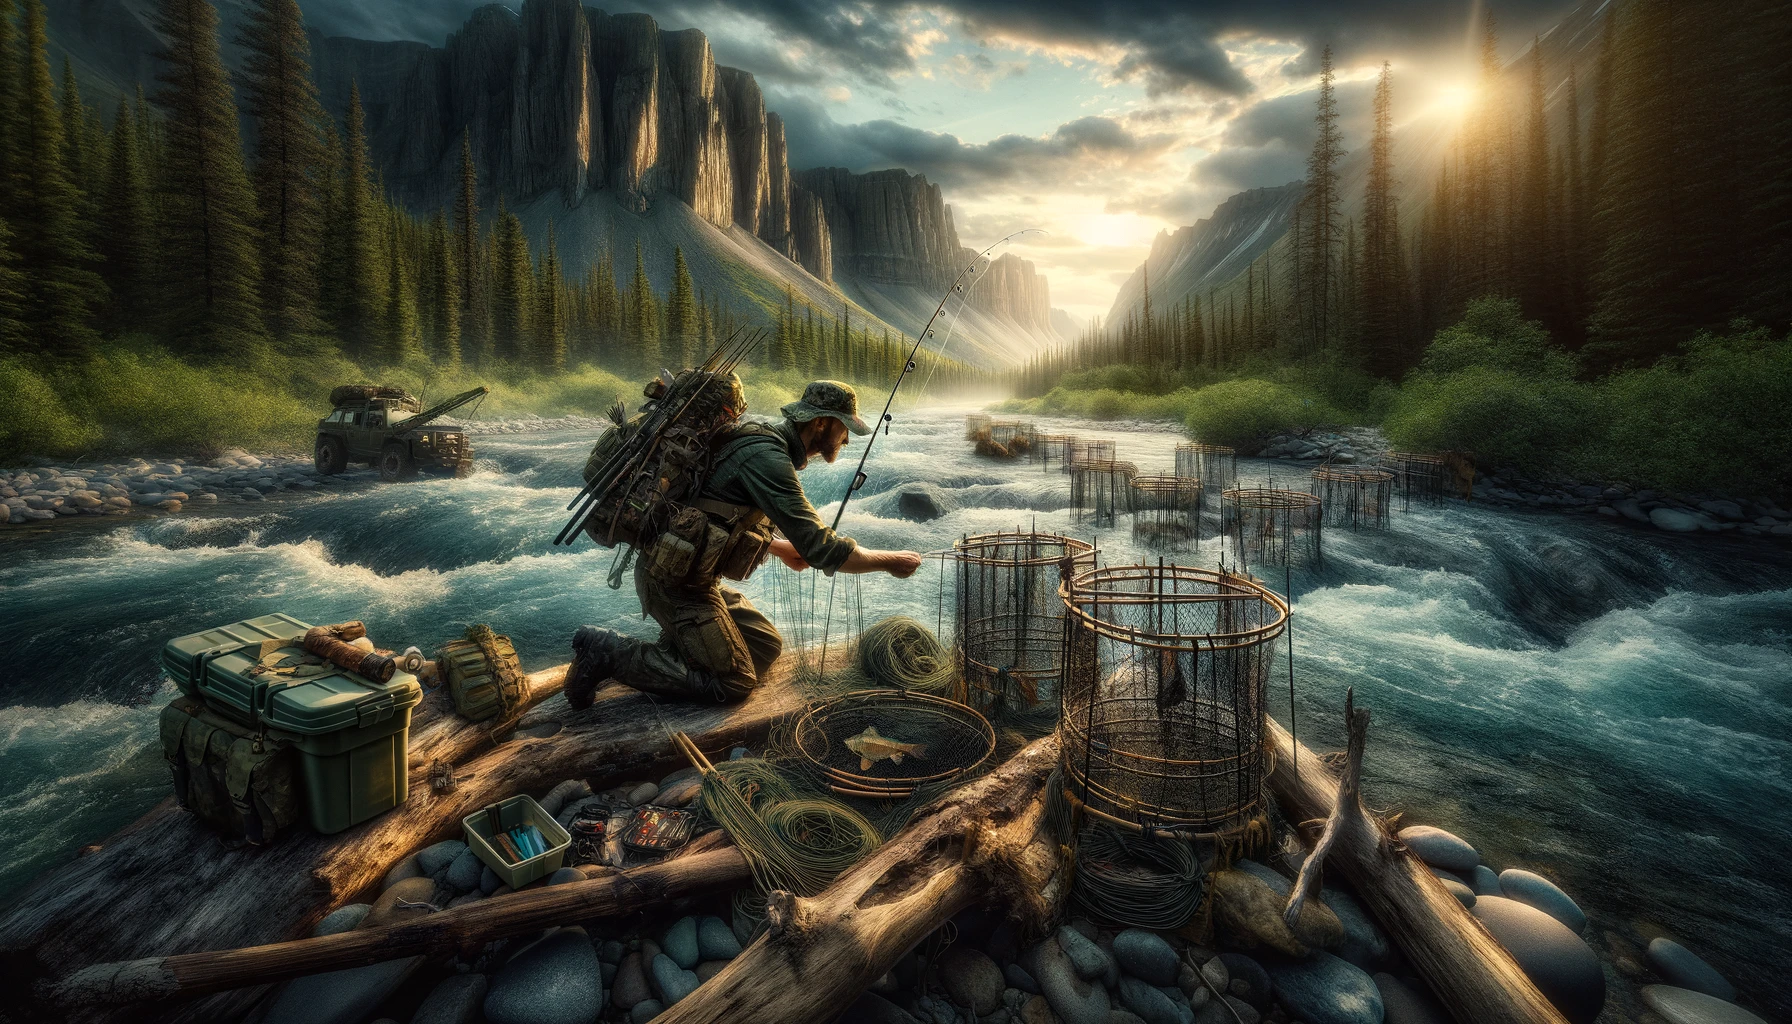 Survivor setting up advanced fish traps in a turbulent river, using natural materials and demonstrating skill in survival fishing techniques against a backdrop of steep cliffs and dense forests at sunset, embodying resilience and innovation